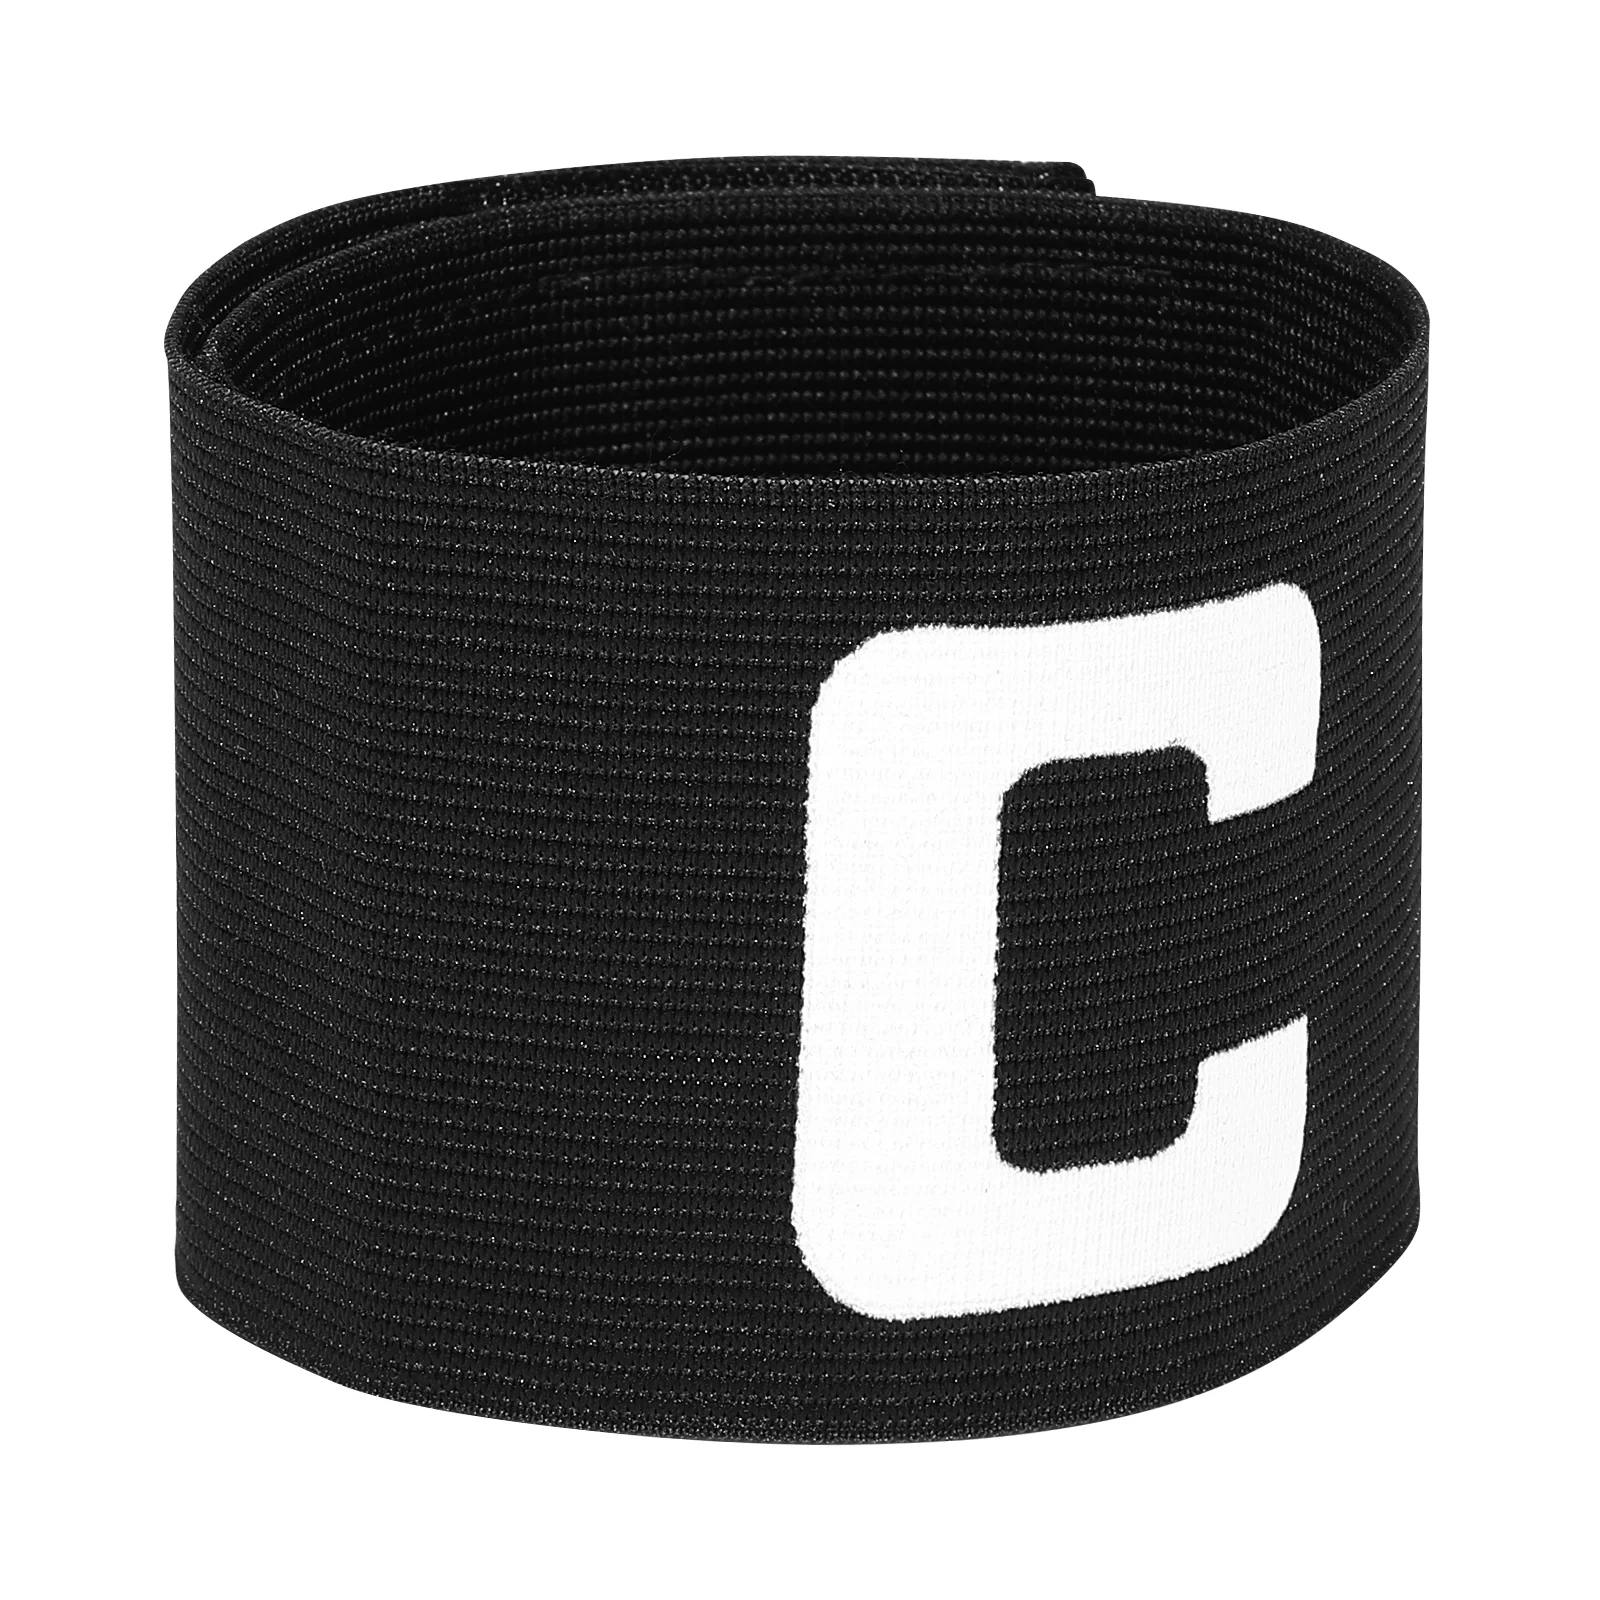 

Captain Armband Soccer Bands Arm Football Adult Captains Armbands Band Youth Softball Adjustable Exercise Anti Sports Drop